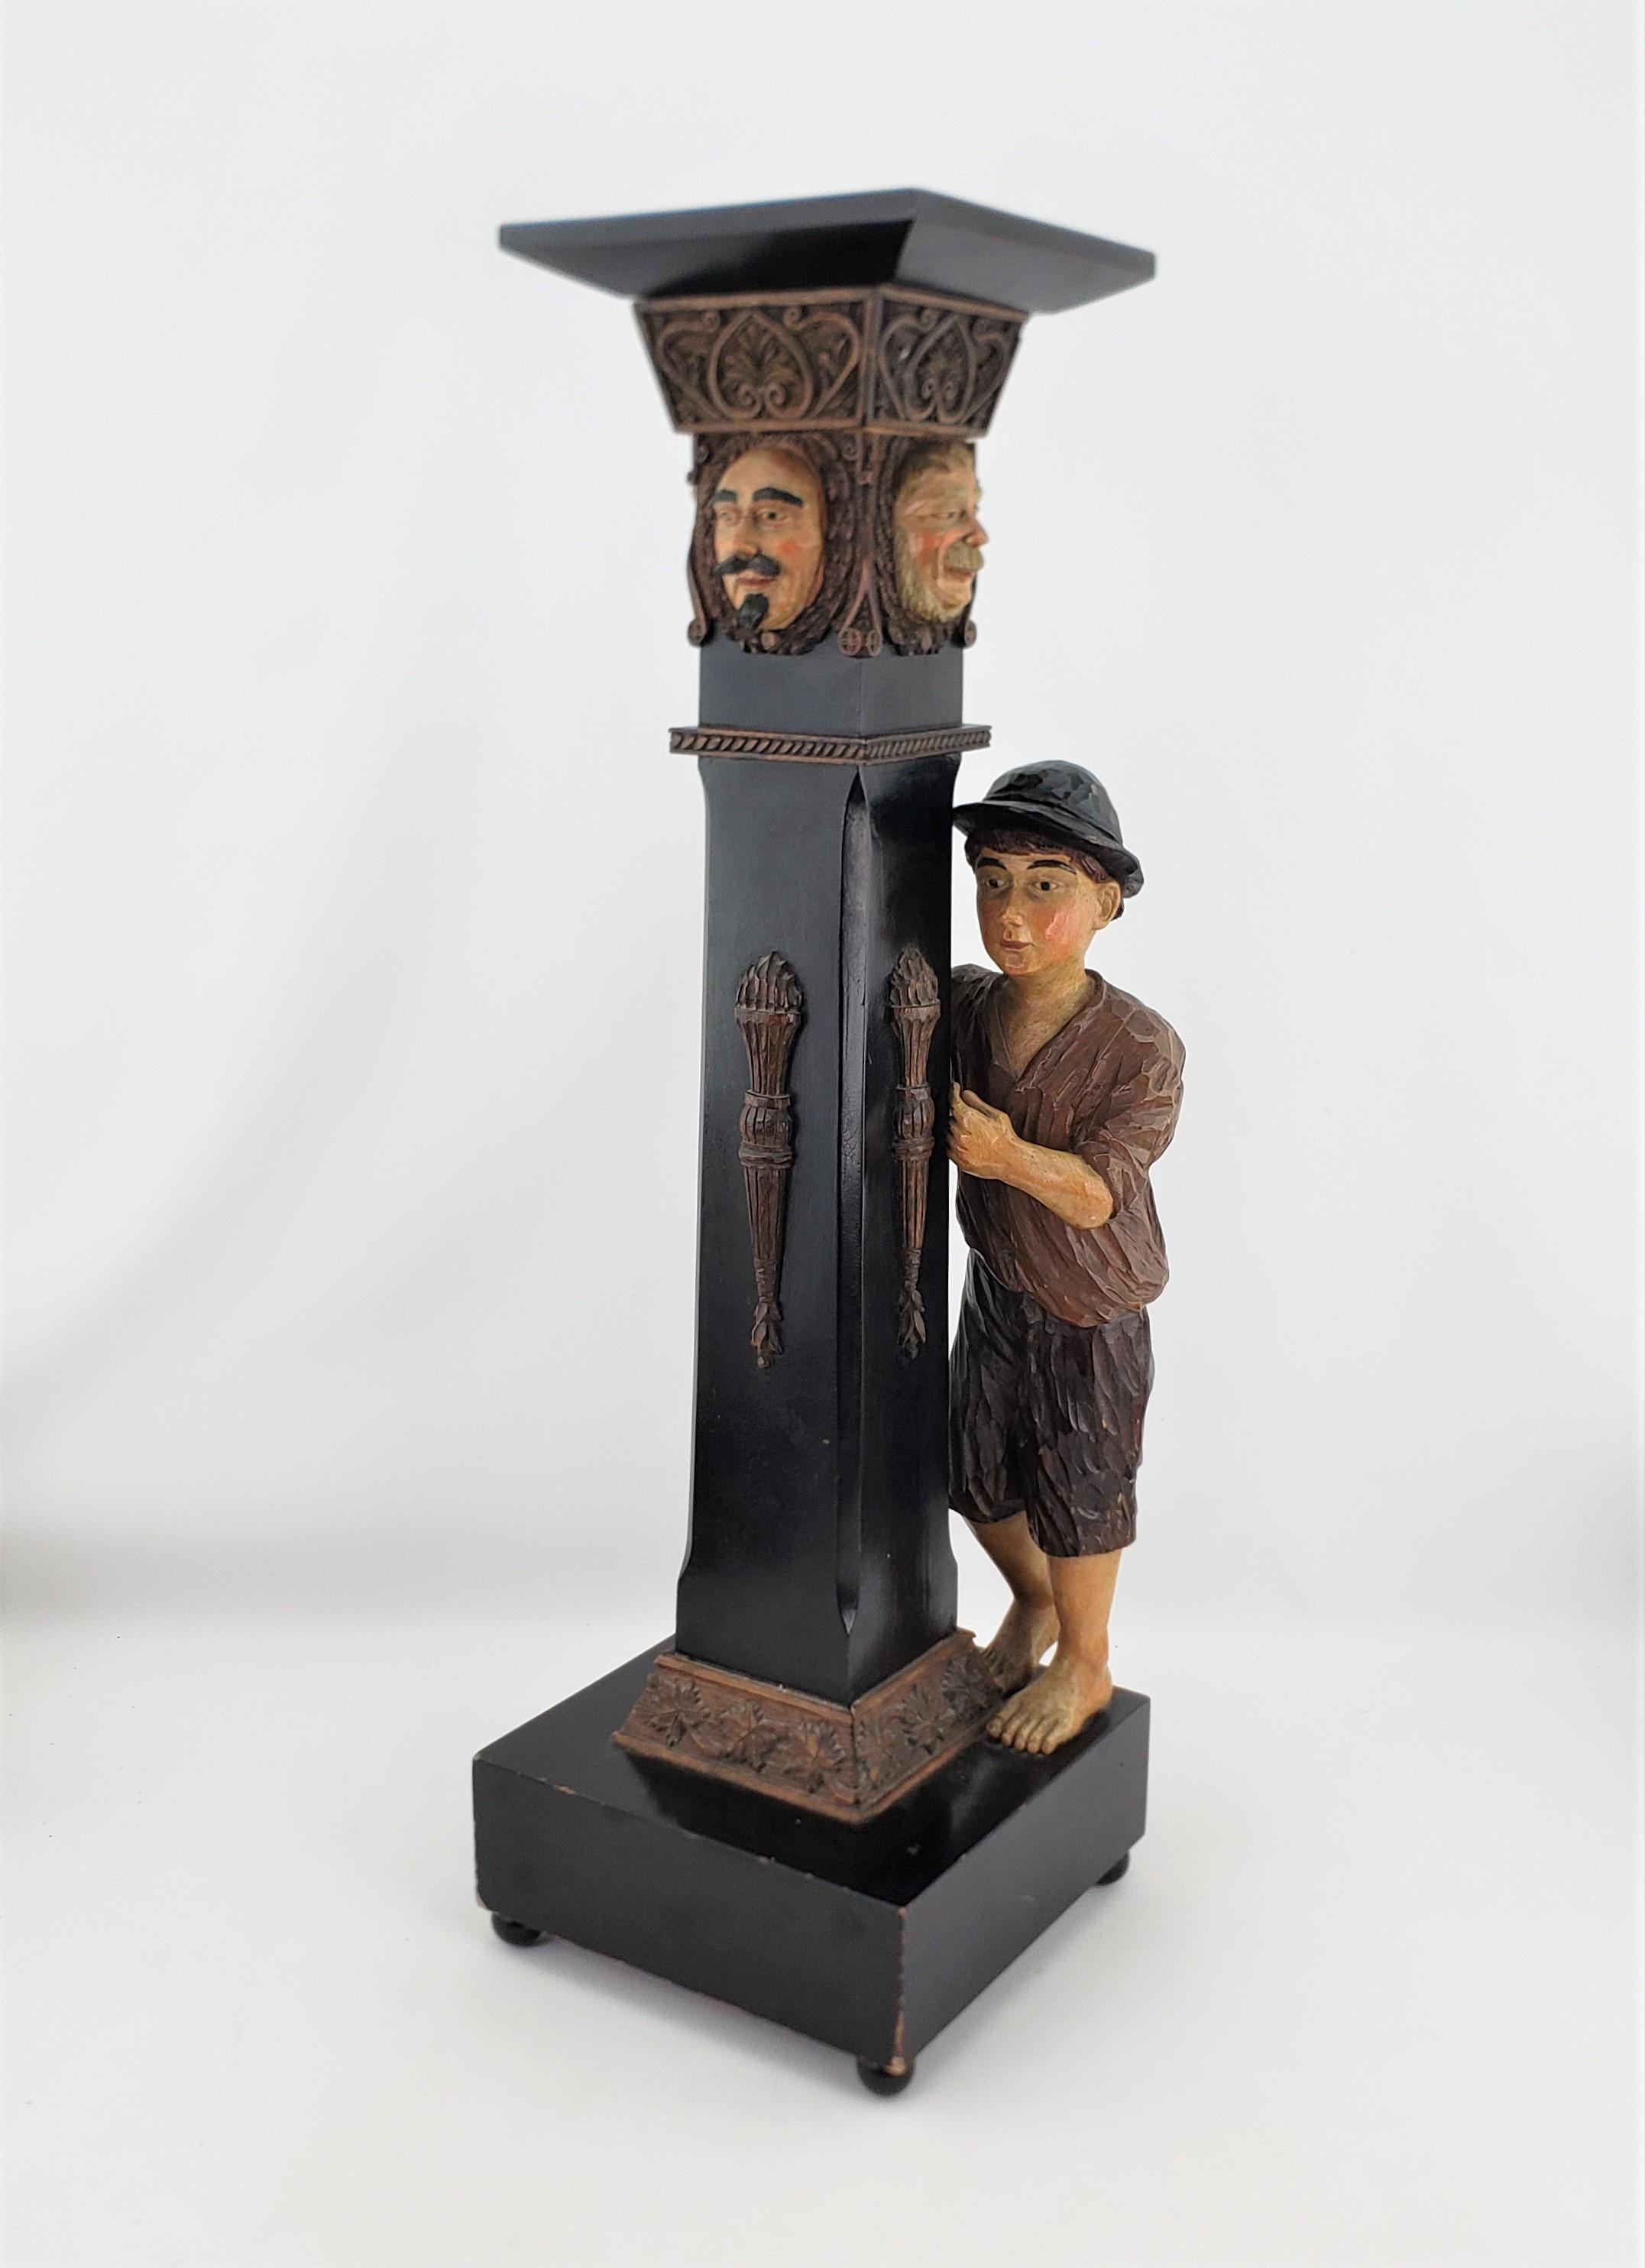 This antique hand-carved and polychromed painted pedestal is unsigned, but presumed to be either Swiss or German and date to approximately 1920 and done in the traditional, Black Forest style. The pedestal features a hand-carved young male peasant